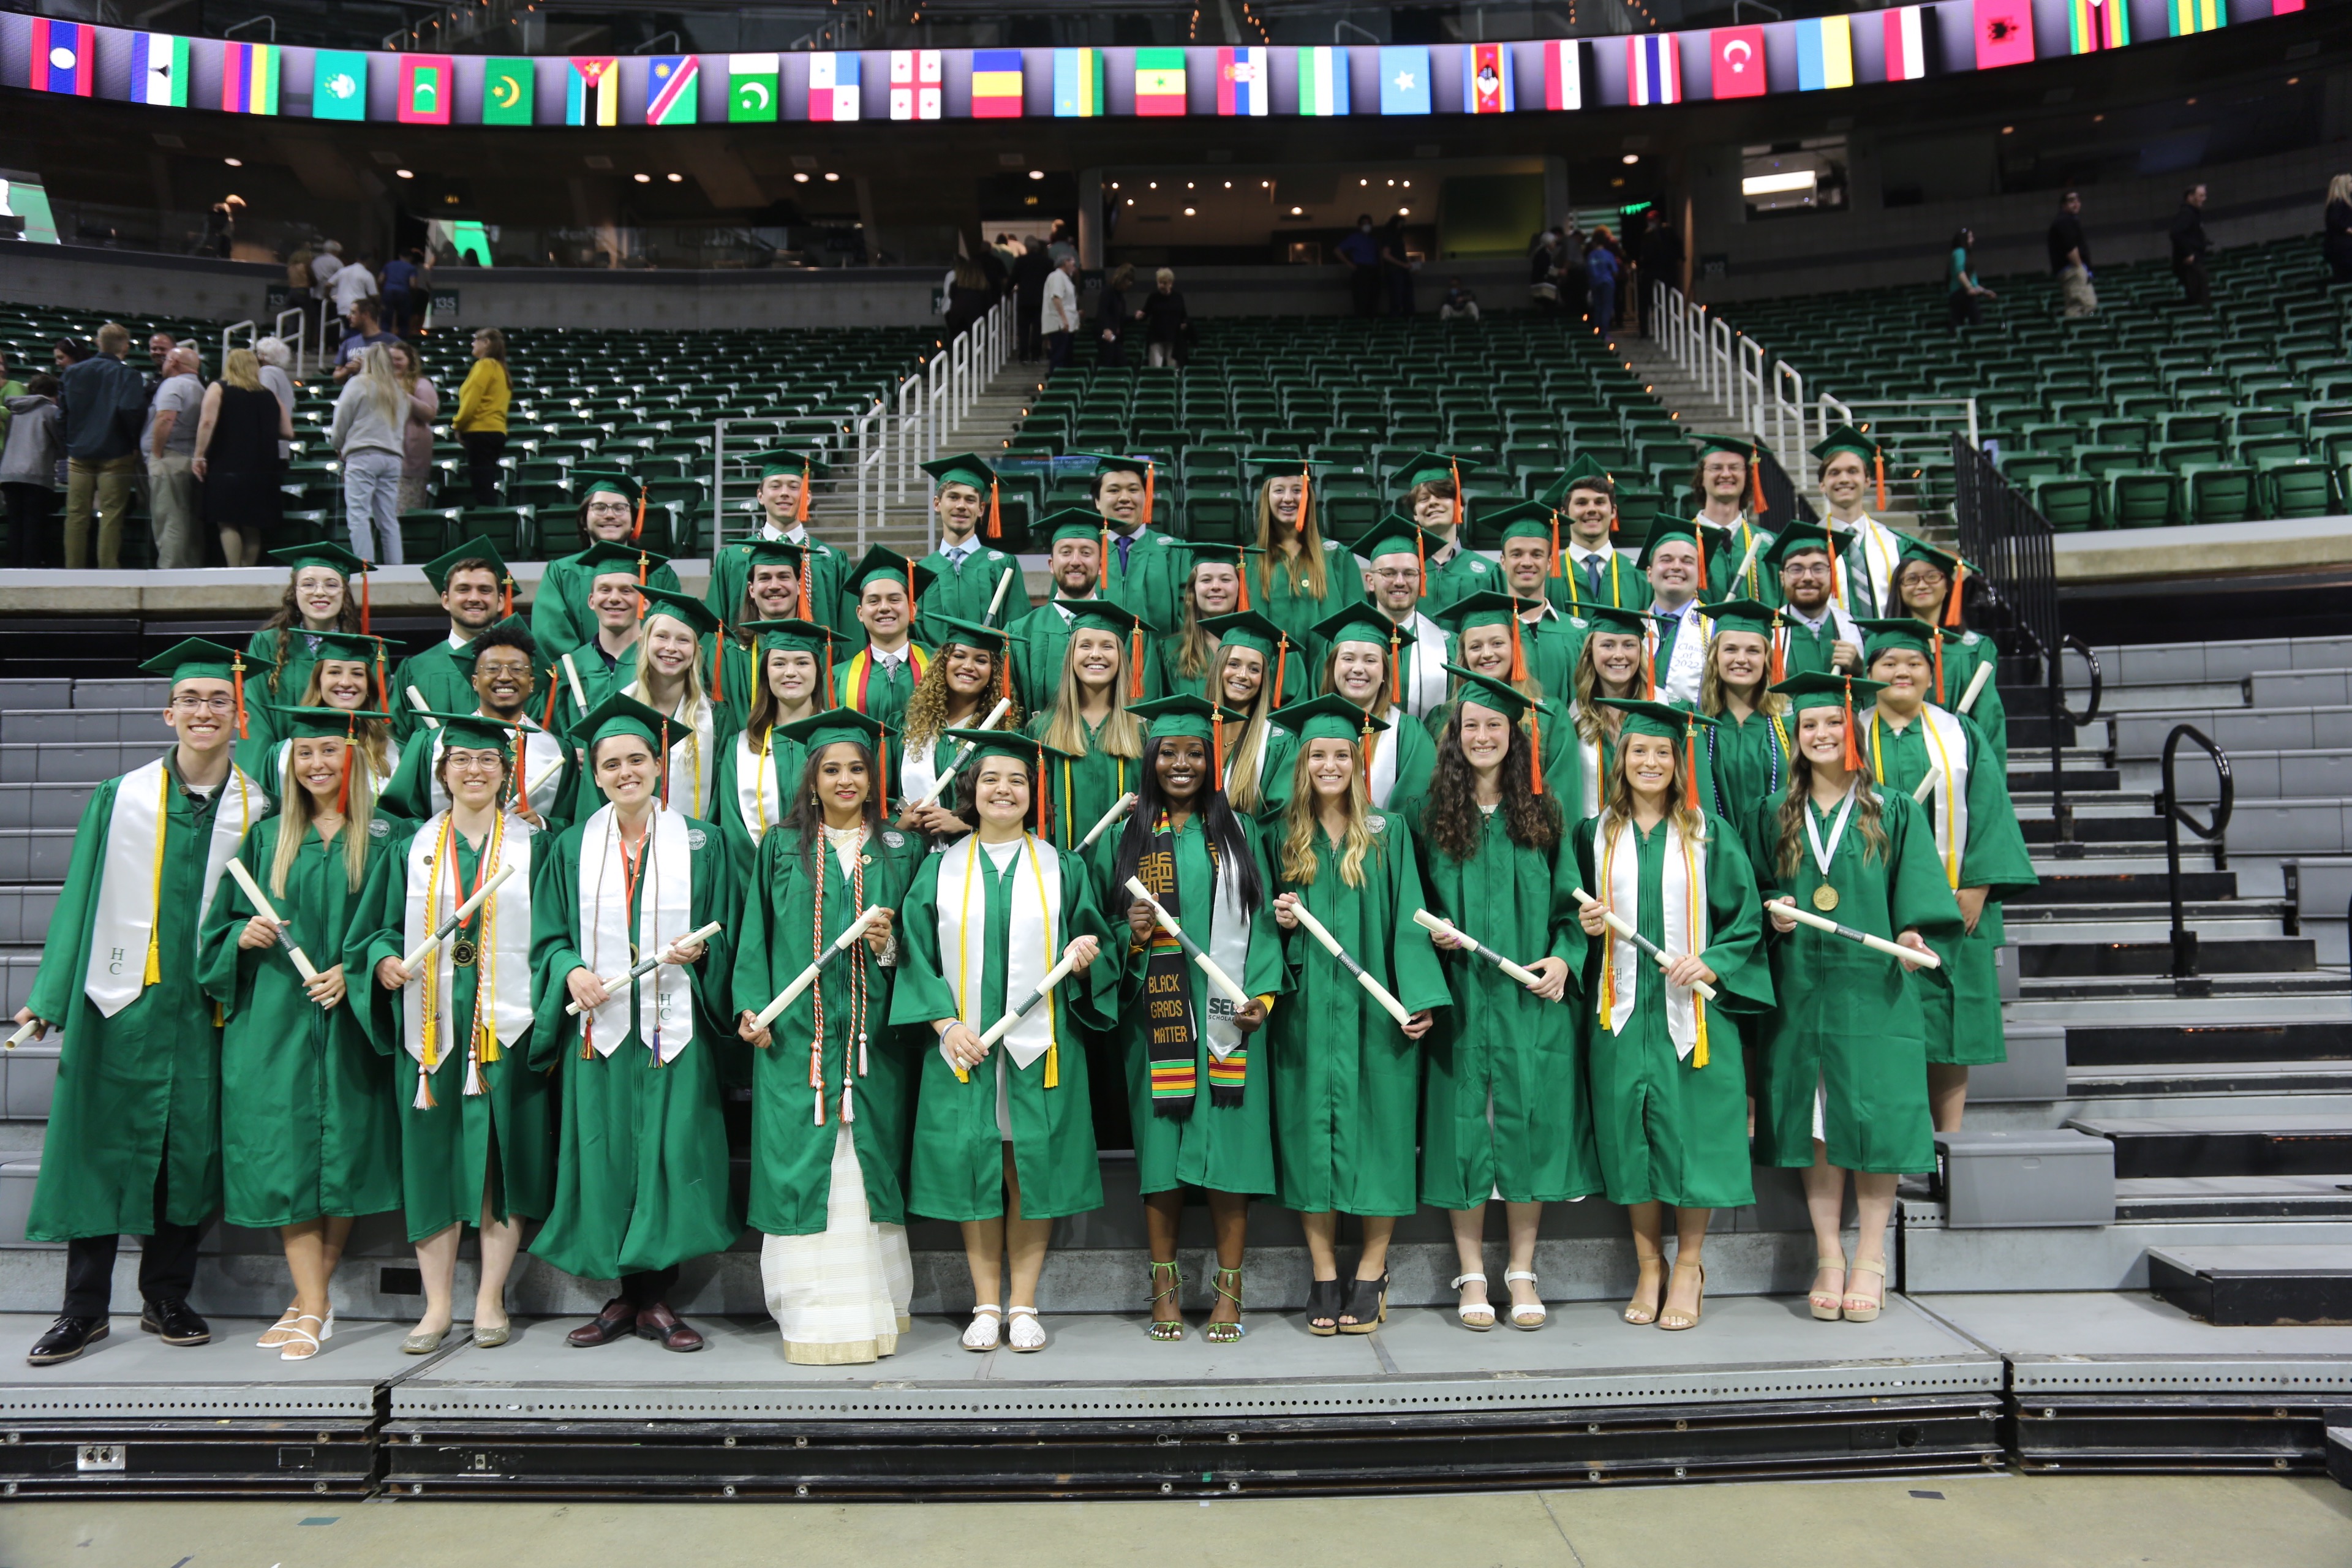 2022 Graduating class from the Department of Biosystems and Agricultural Engineering